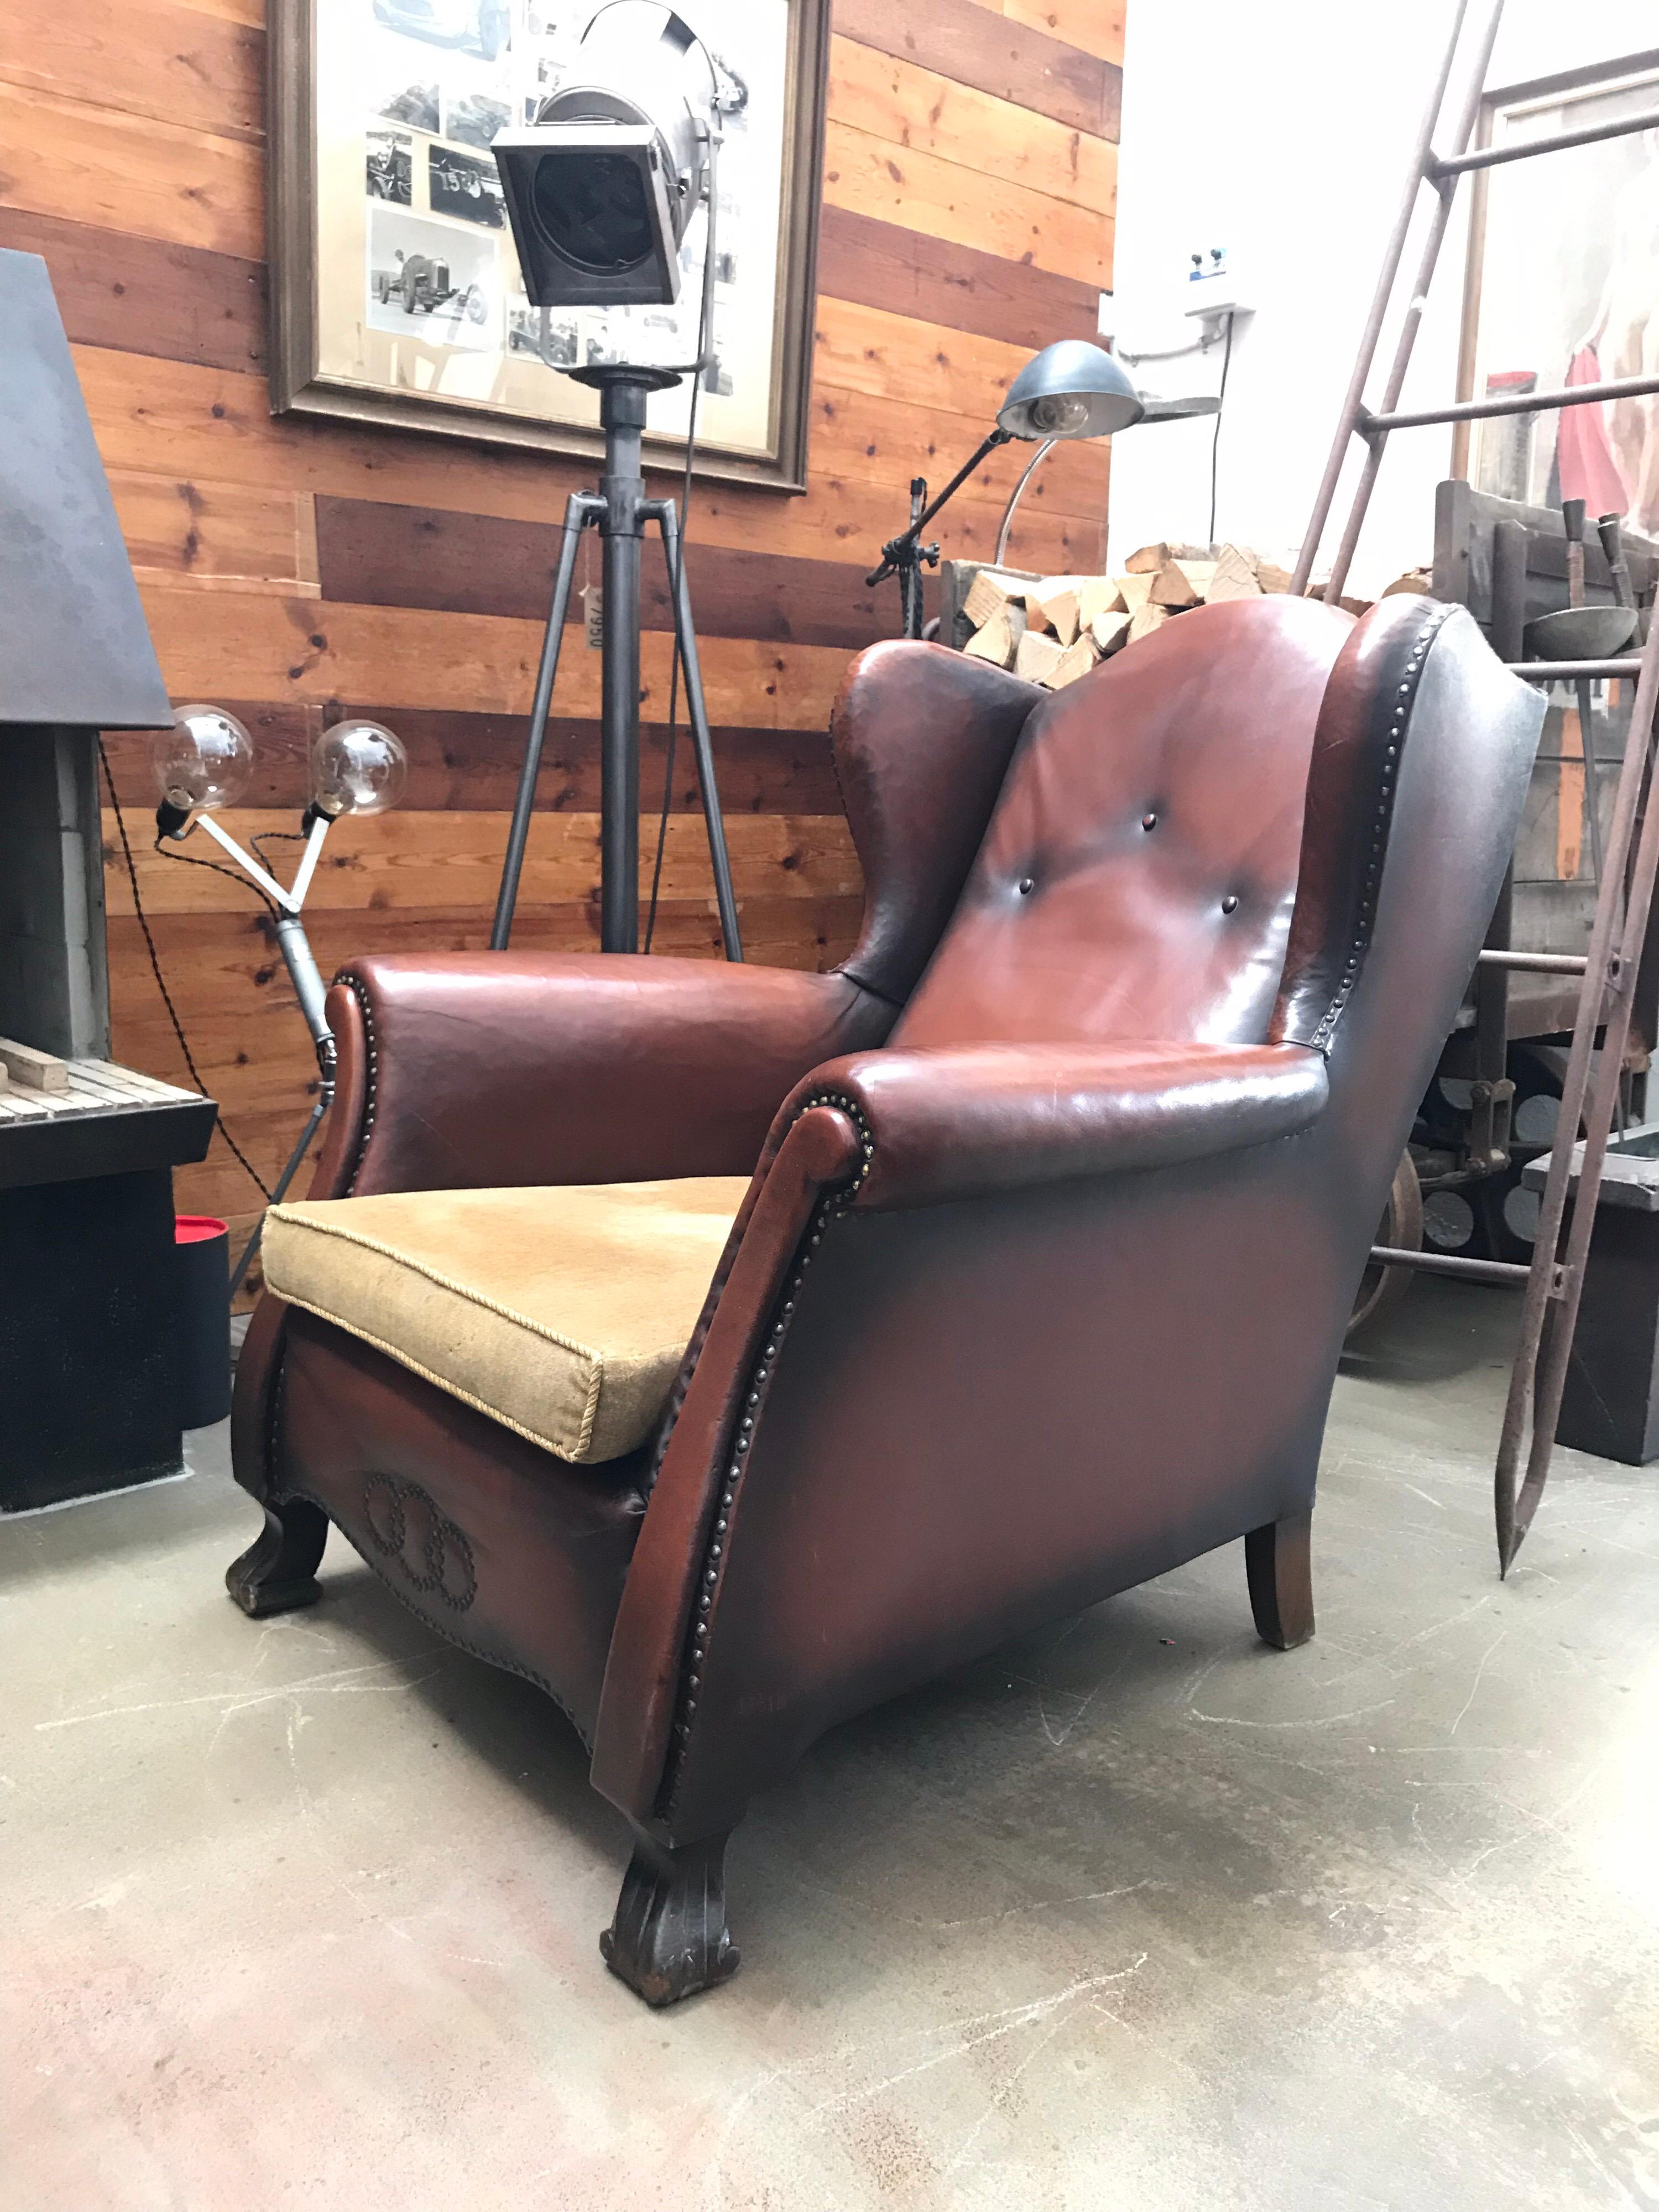 Beautiful leather and brass studded lounge club chair from the 1930s in the style of Otto Schultz
Oak frame and with oak feet
In great original condition and with a great patina to the leather and brass
The leather is in great condition for its